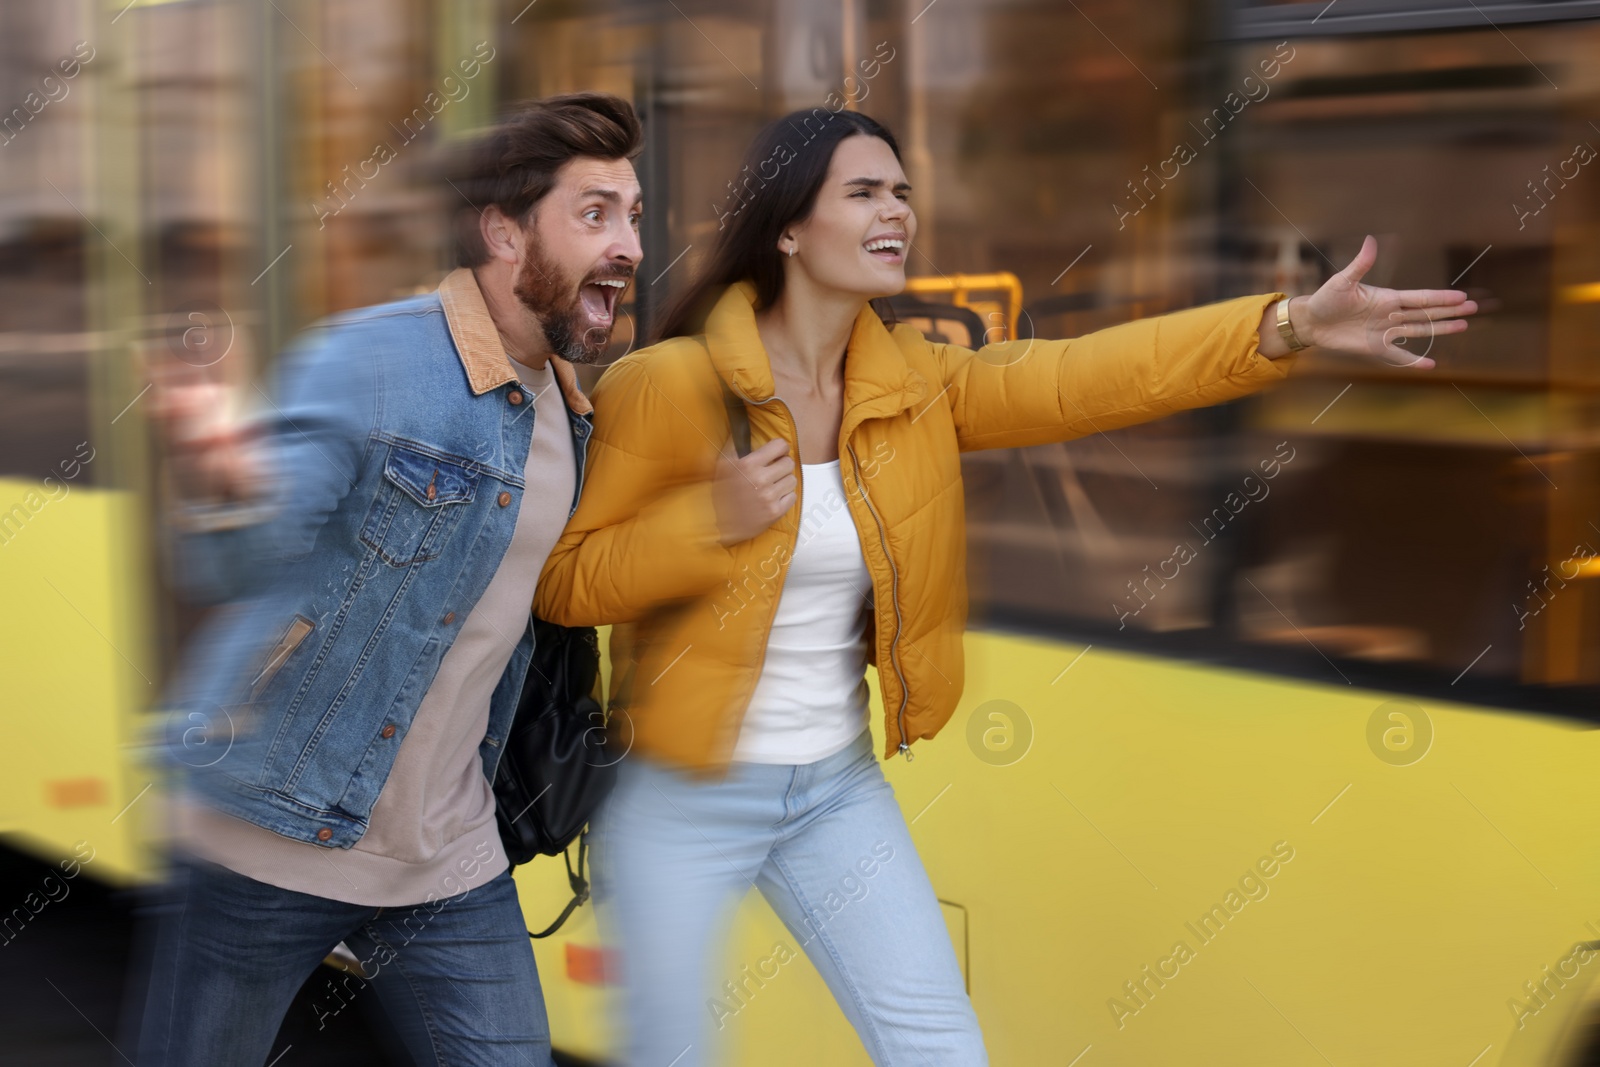 Image of Being late. Couple running after bus outdoors. Motion blur effect